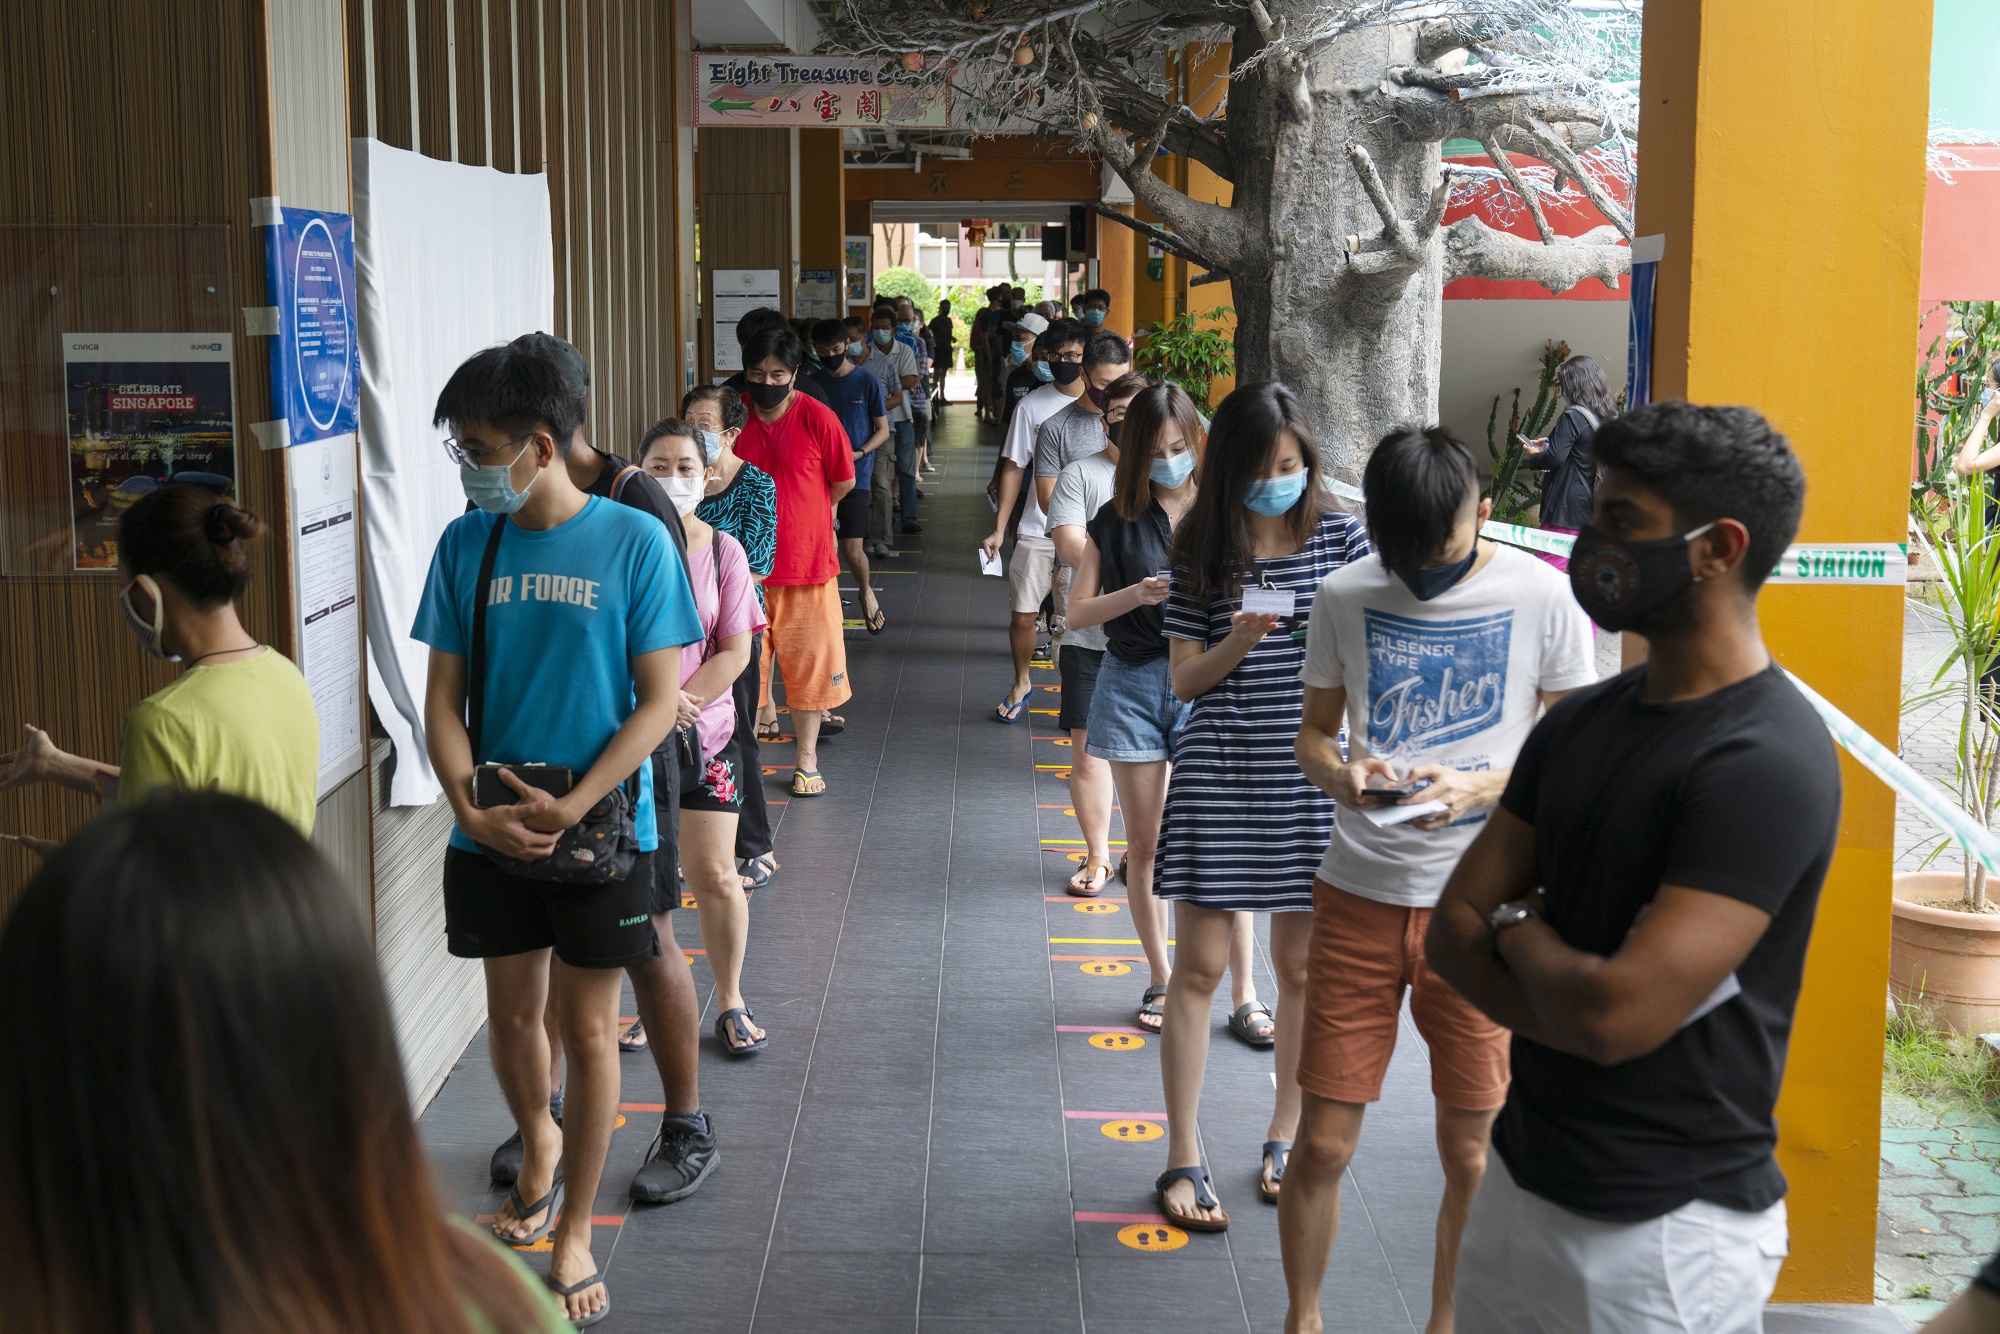 Voters wearing protective masks observe social distancing measures while waiting in line at the Poi Ching School polling station in Singapore, on July 10.